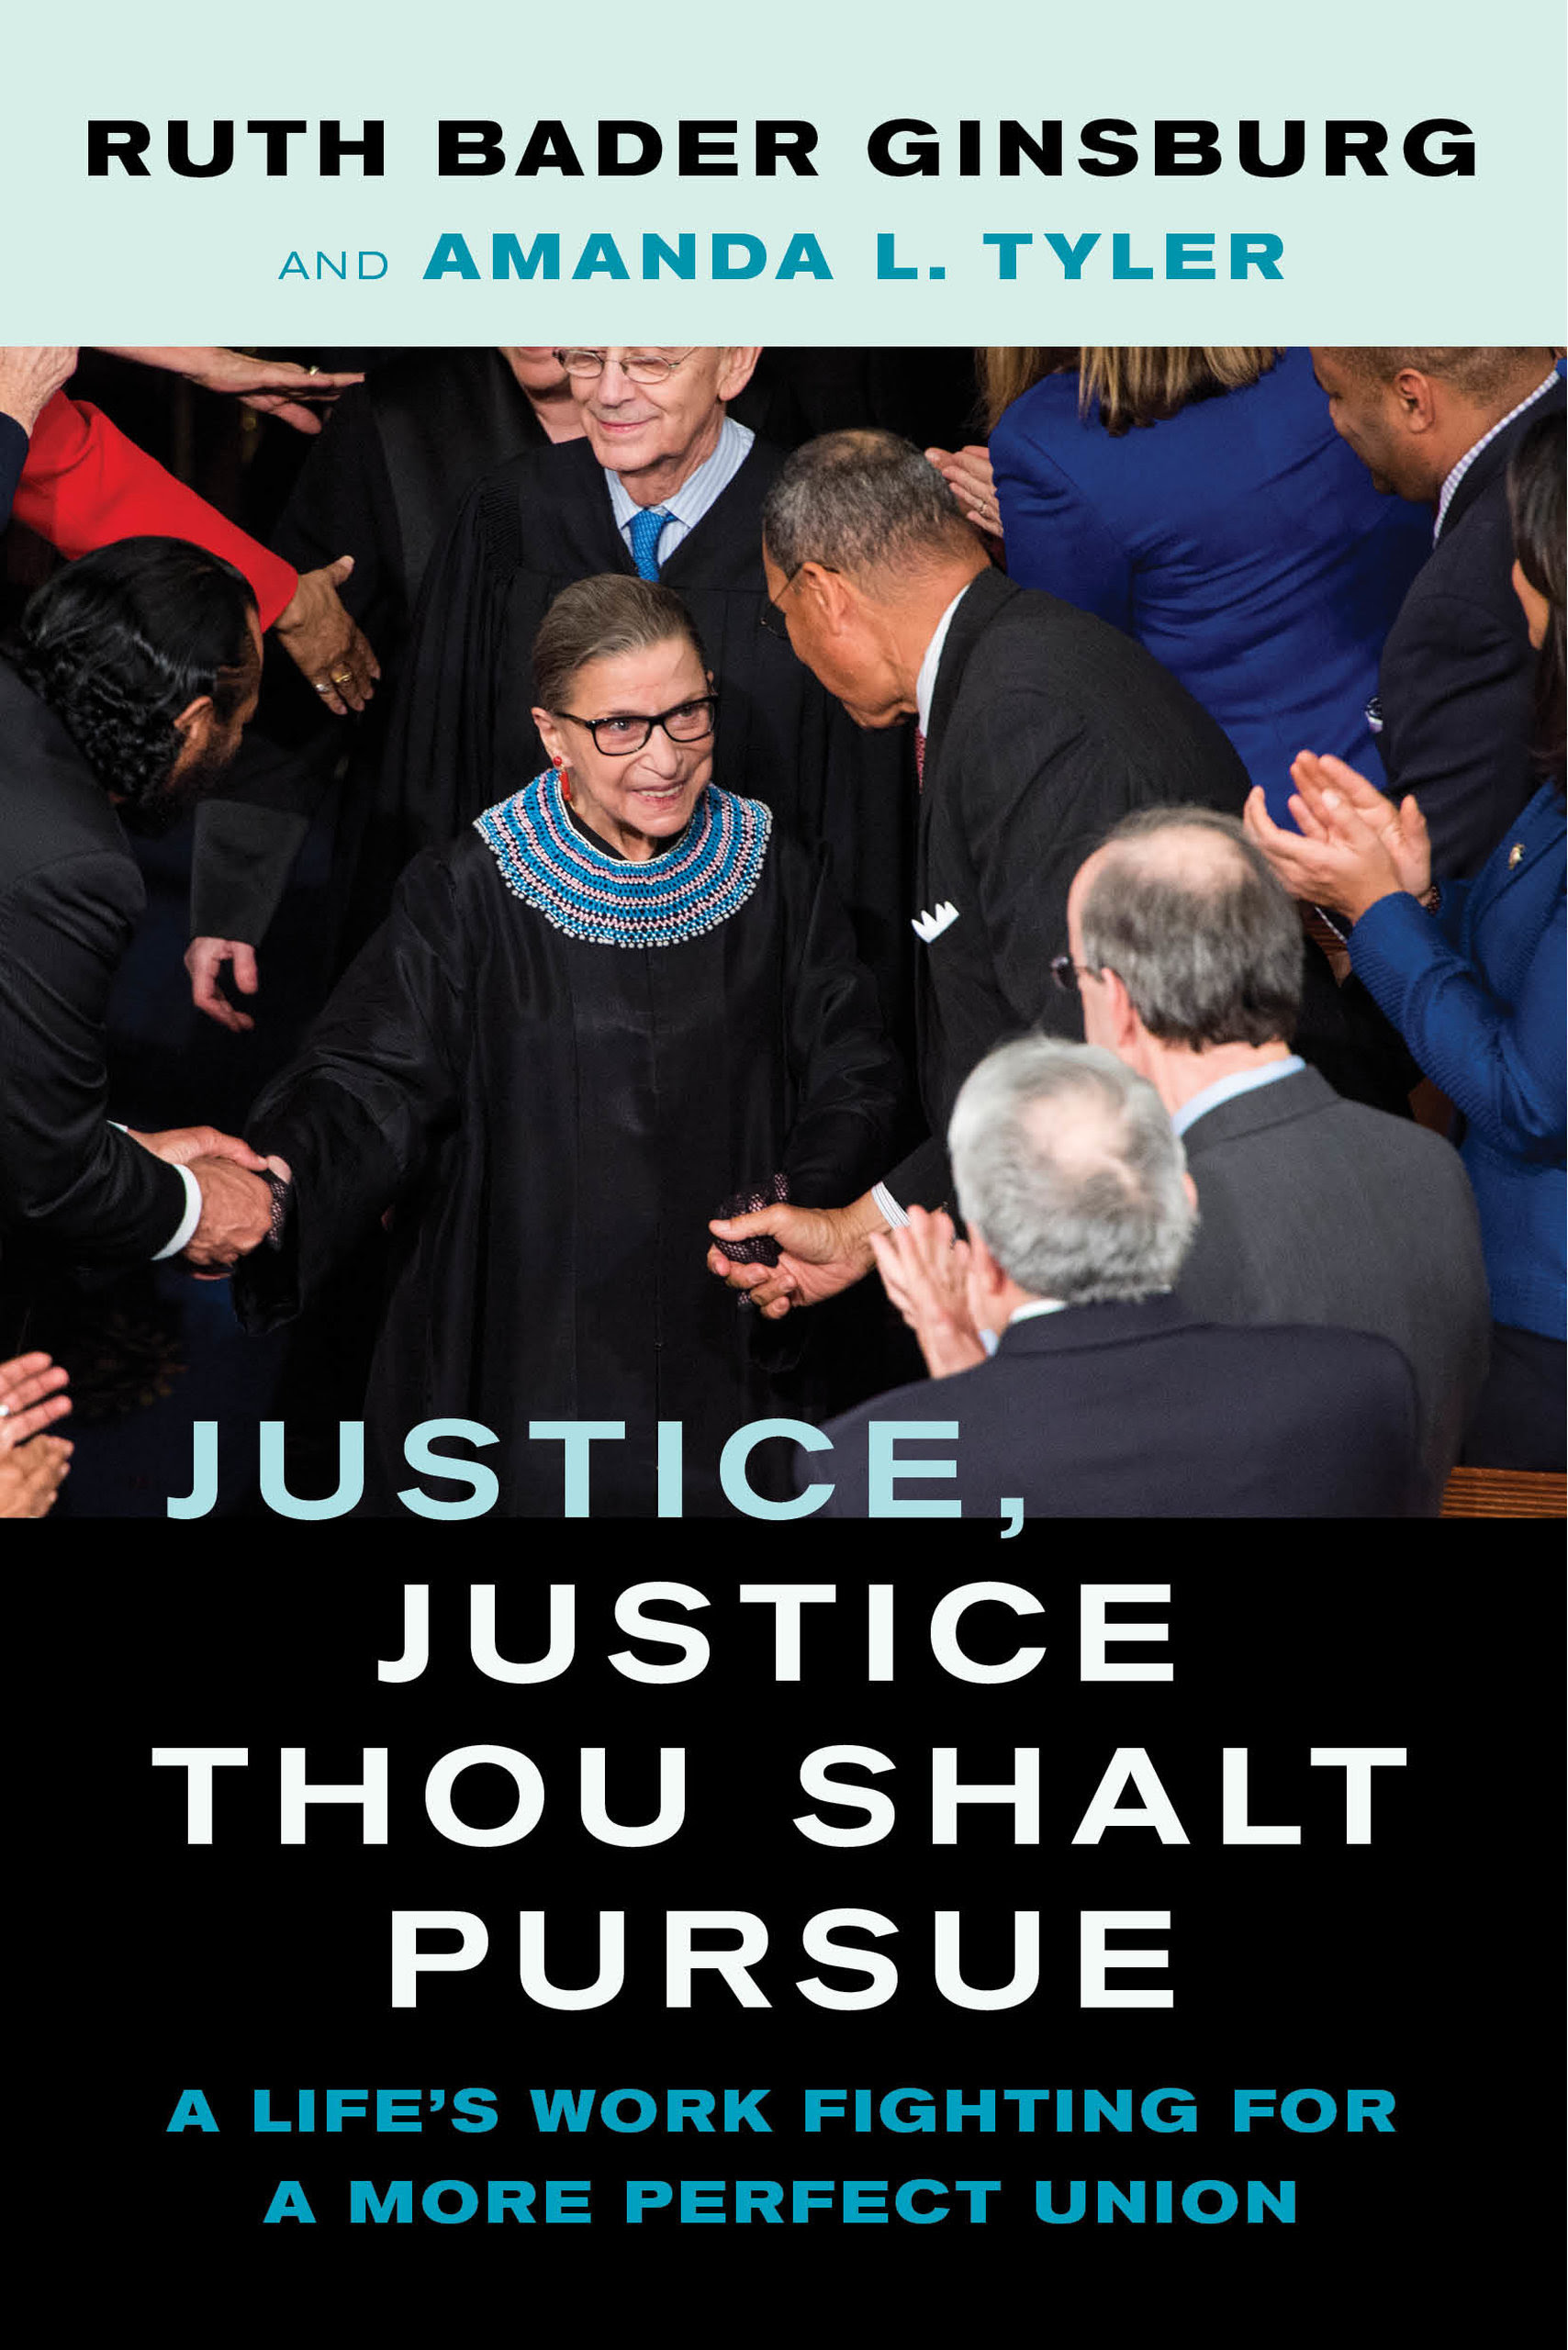 Justice, Justice Thou Shalt Pursue: A Life's Work Fighting for a More Perfect Union PDF